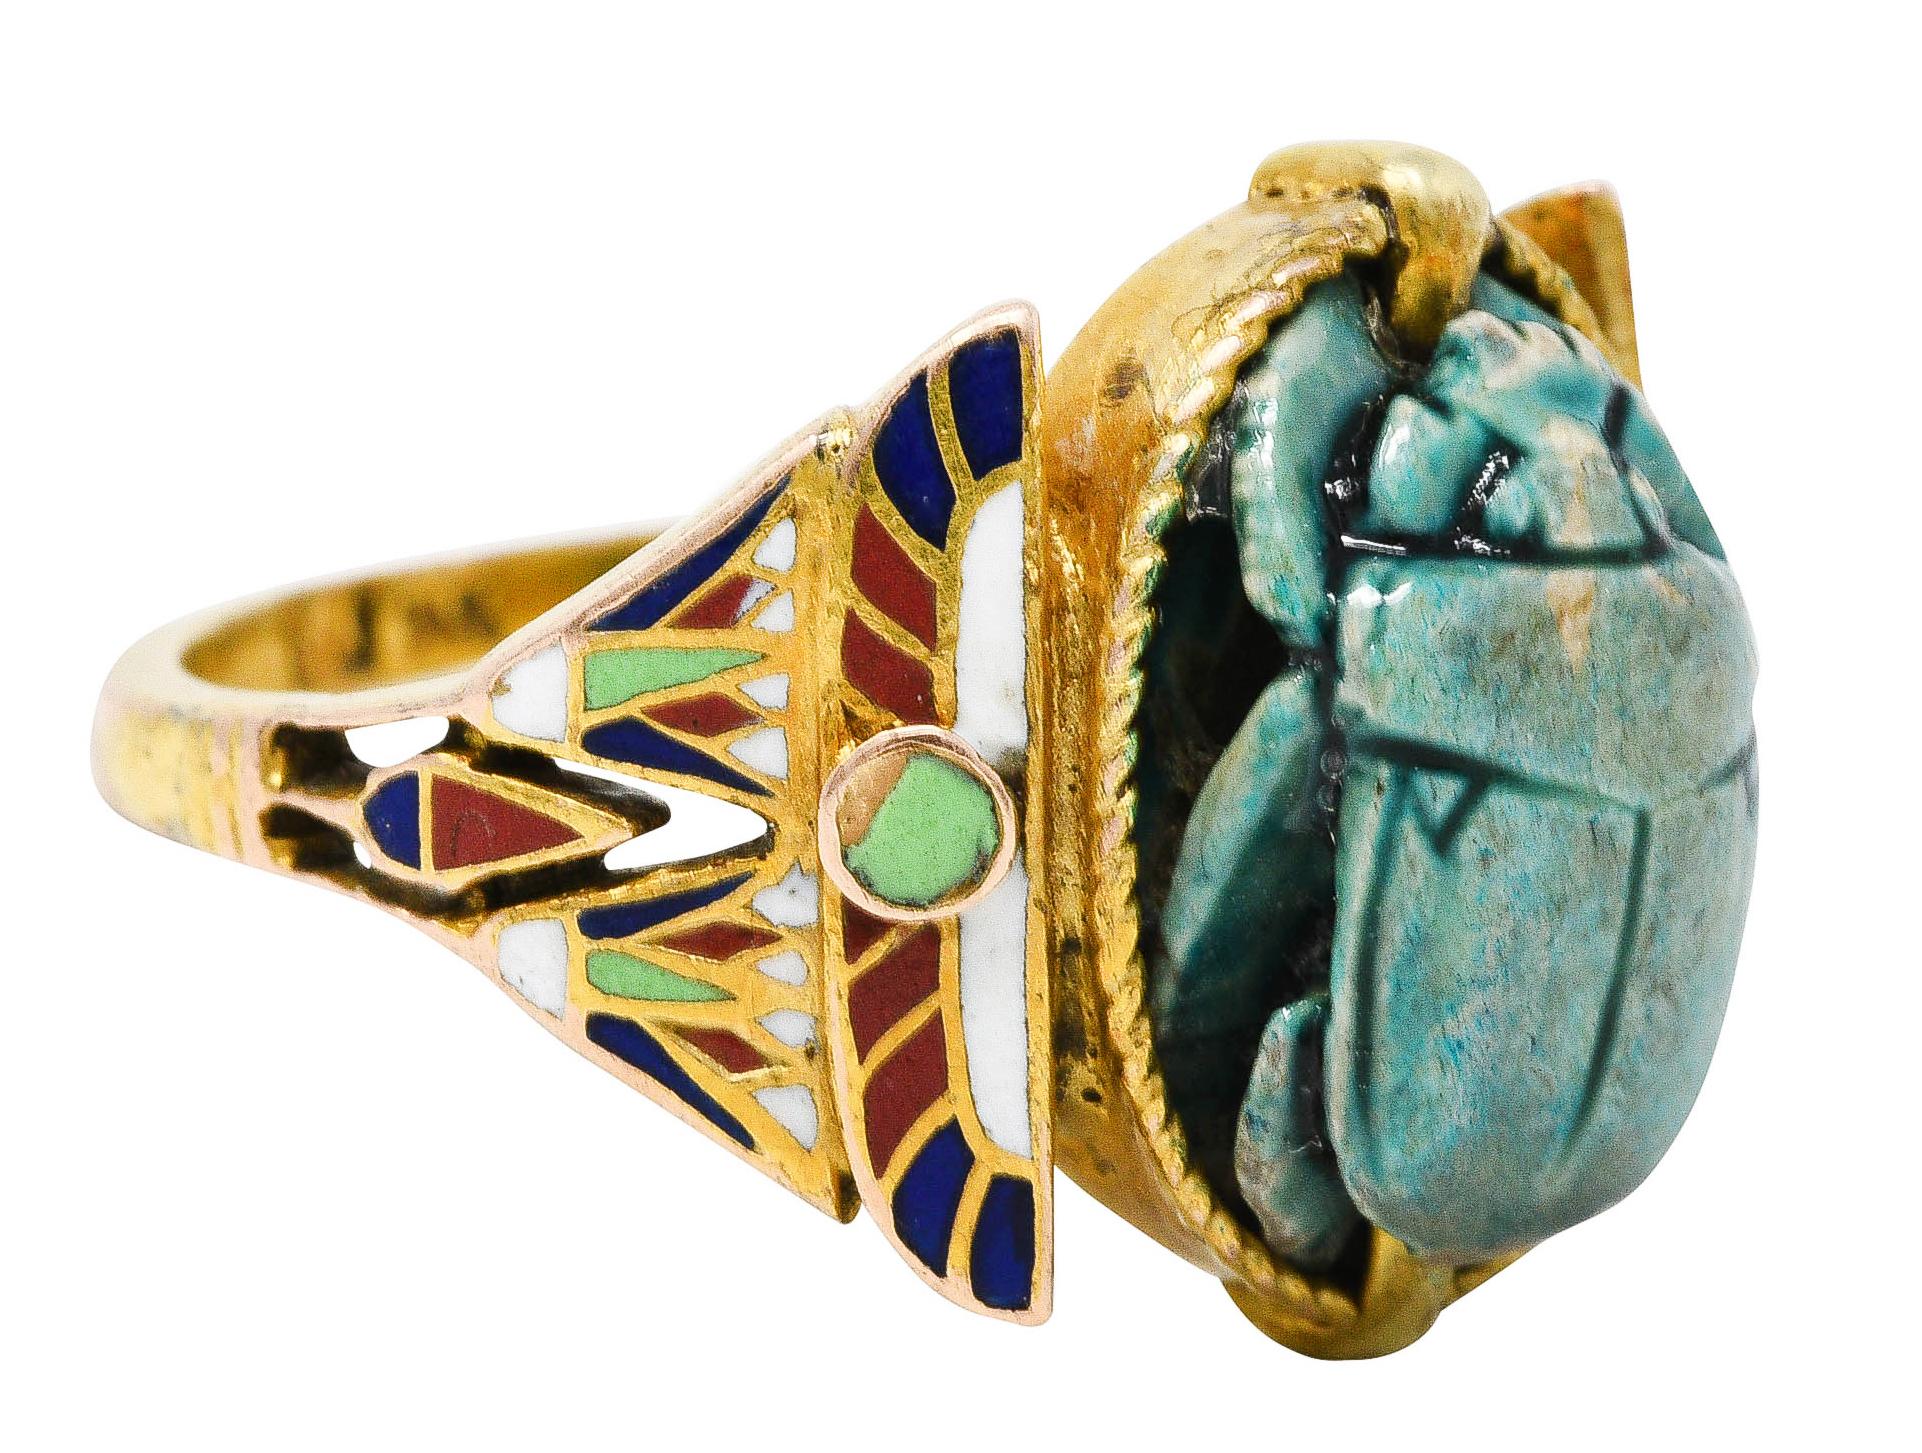 Centering hardstone deeply carved to depict a scarab and hieroglyphics - coated in turquoise faience

Flanked by stylized and colorful shoulders - glossed in enamel that exhibits some loss consistent with age

With a winged scarab motif and lotus